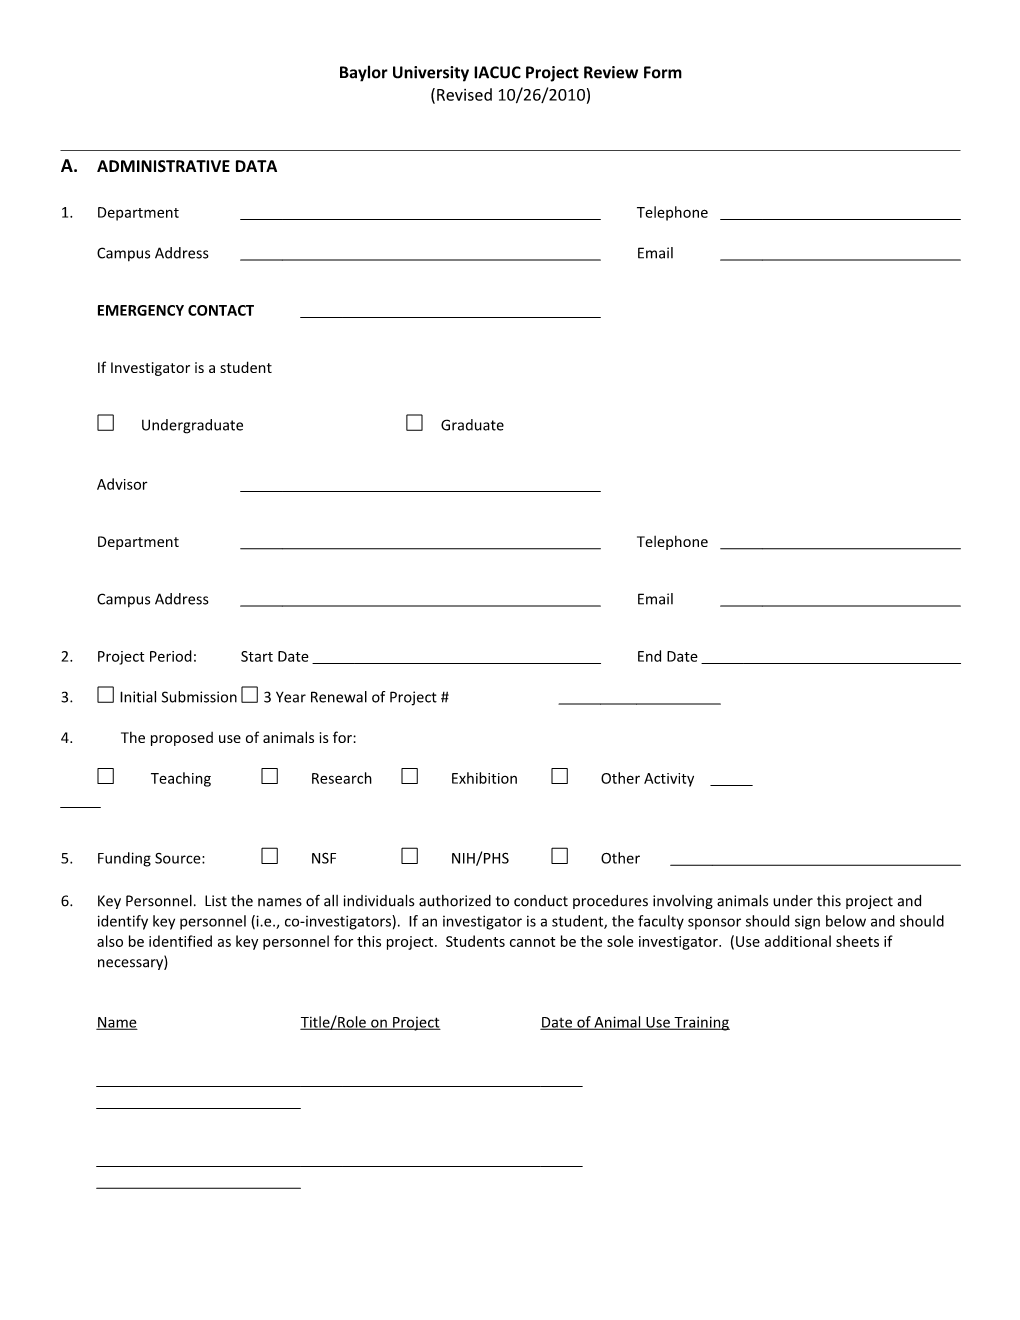 Baylor University IACUC Project Review Form